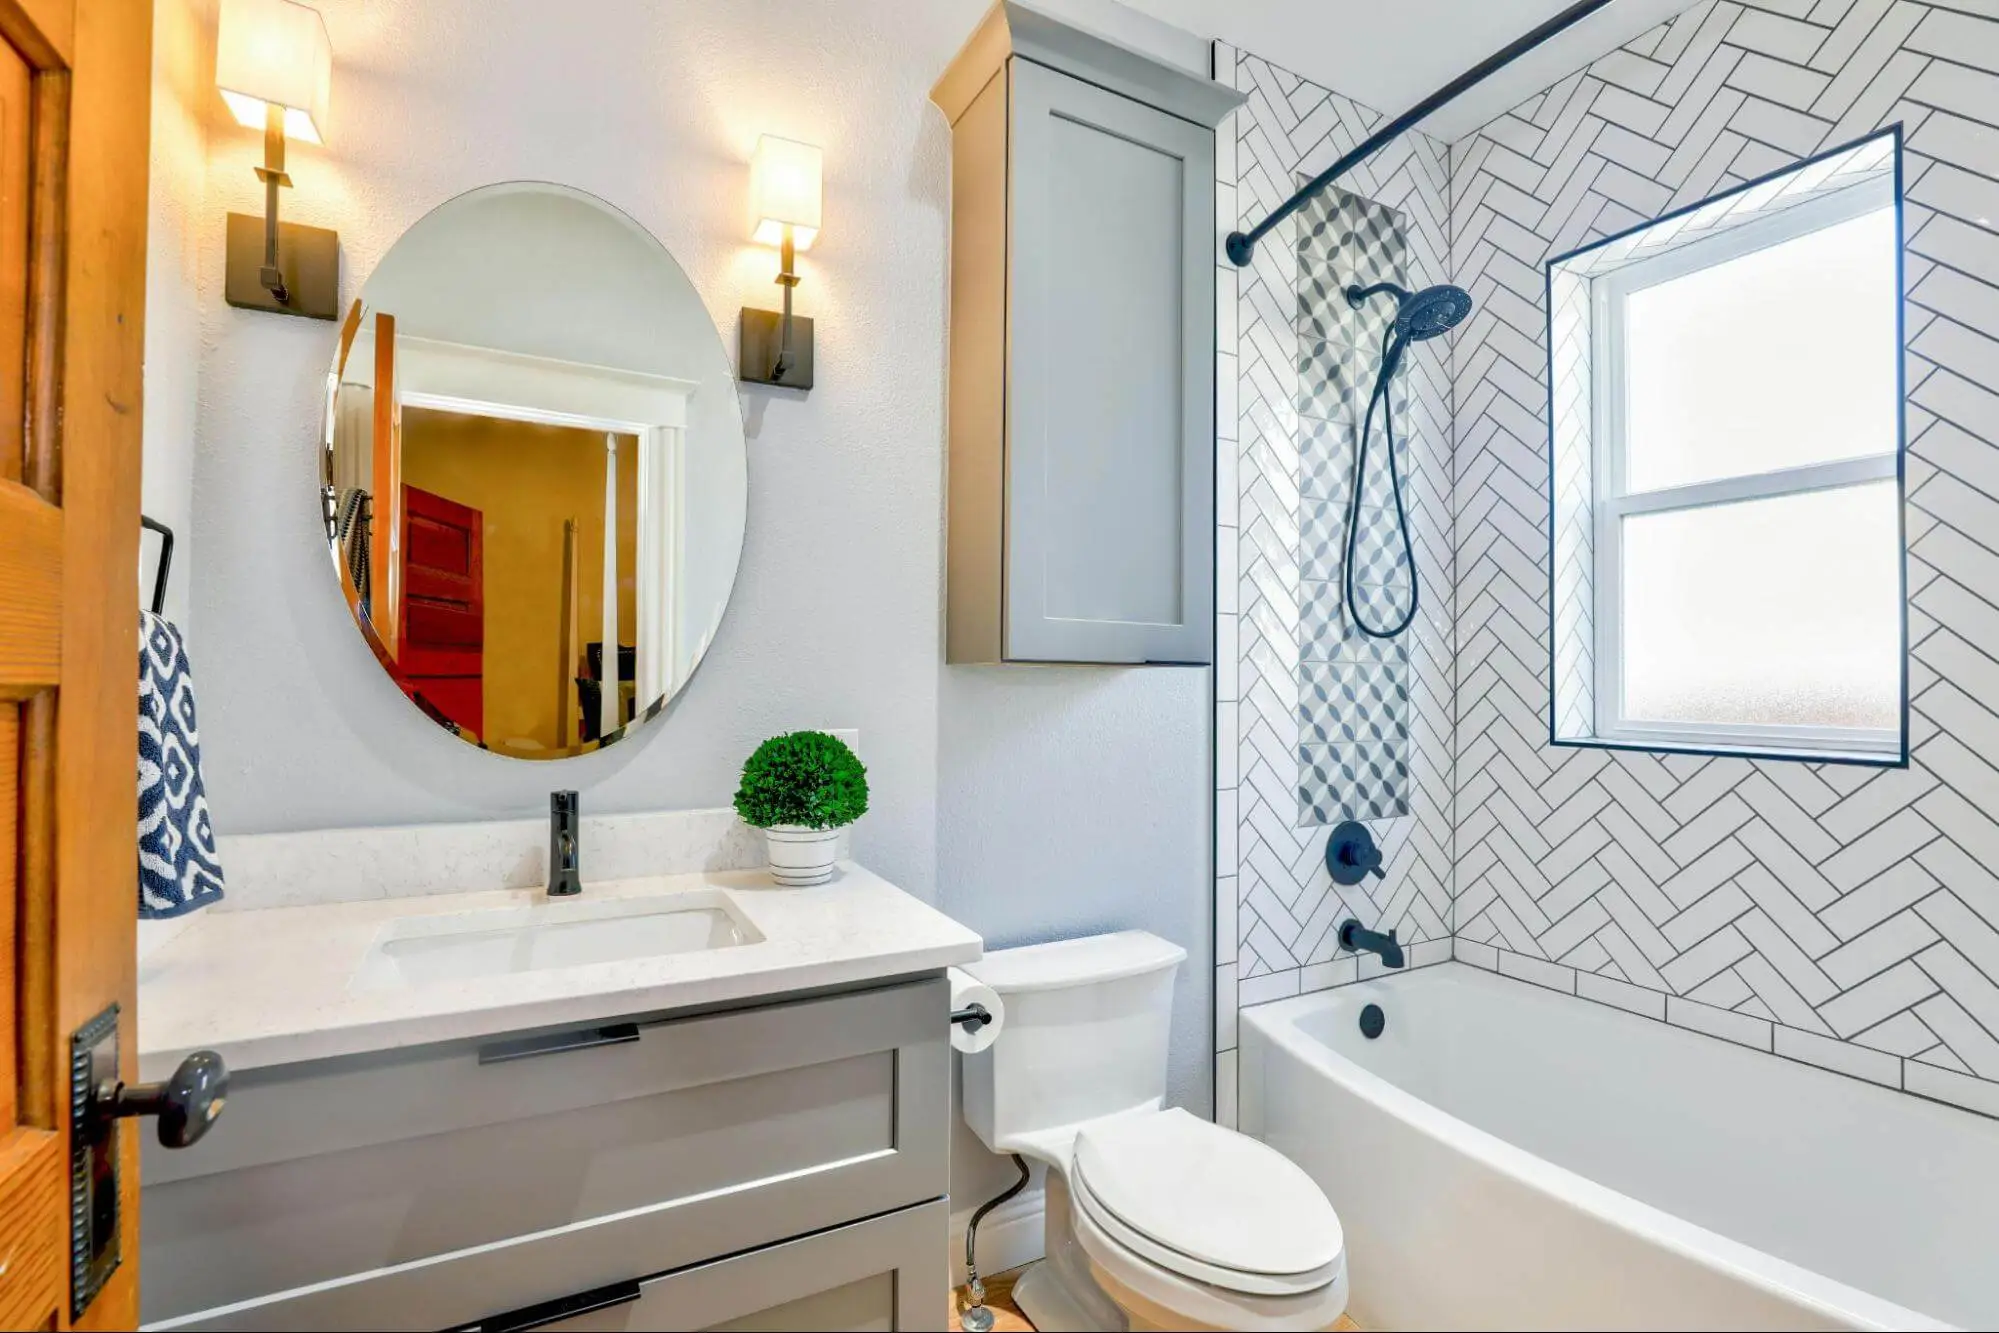 A white bathroom with a tiled shower. it is brightly lit and features a white sink, white toilet, and a round mirror.